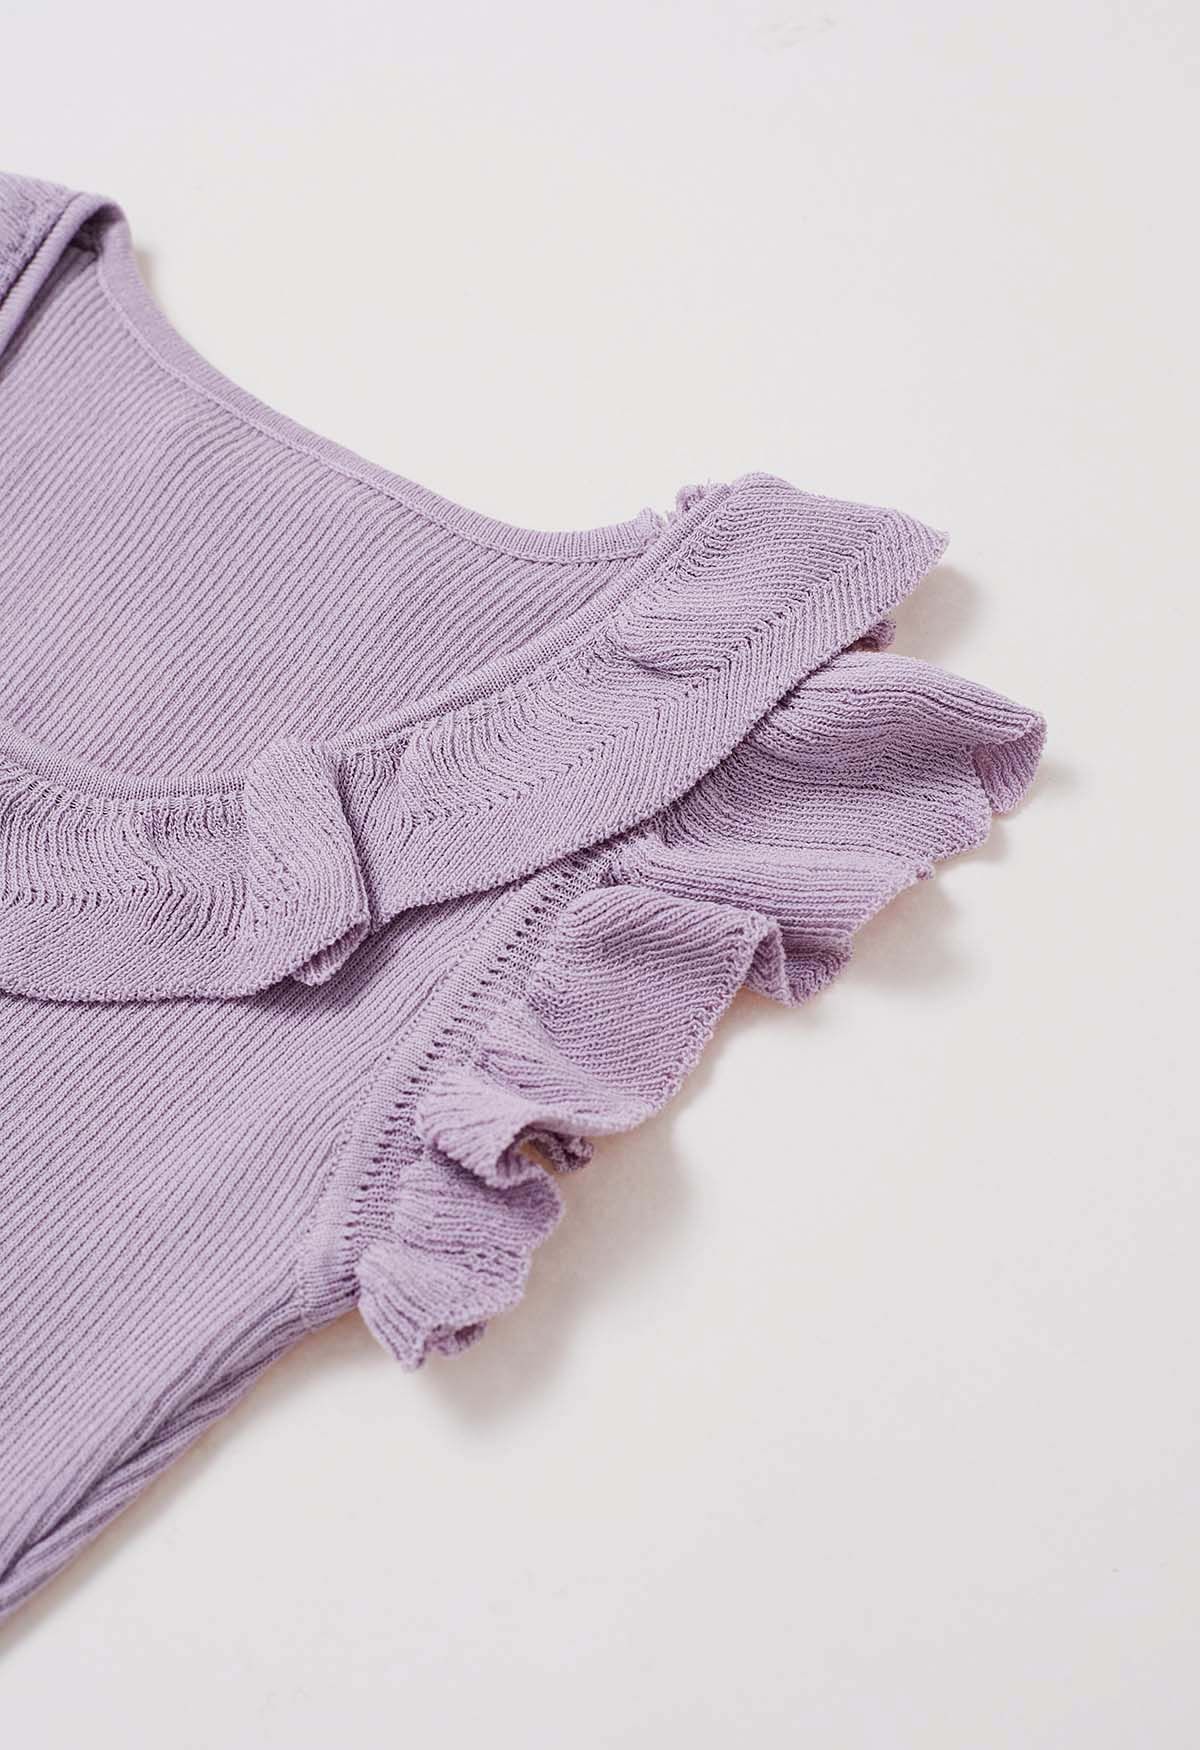 Ethereal Ruffle Sleeveless Knit Top in Lilac